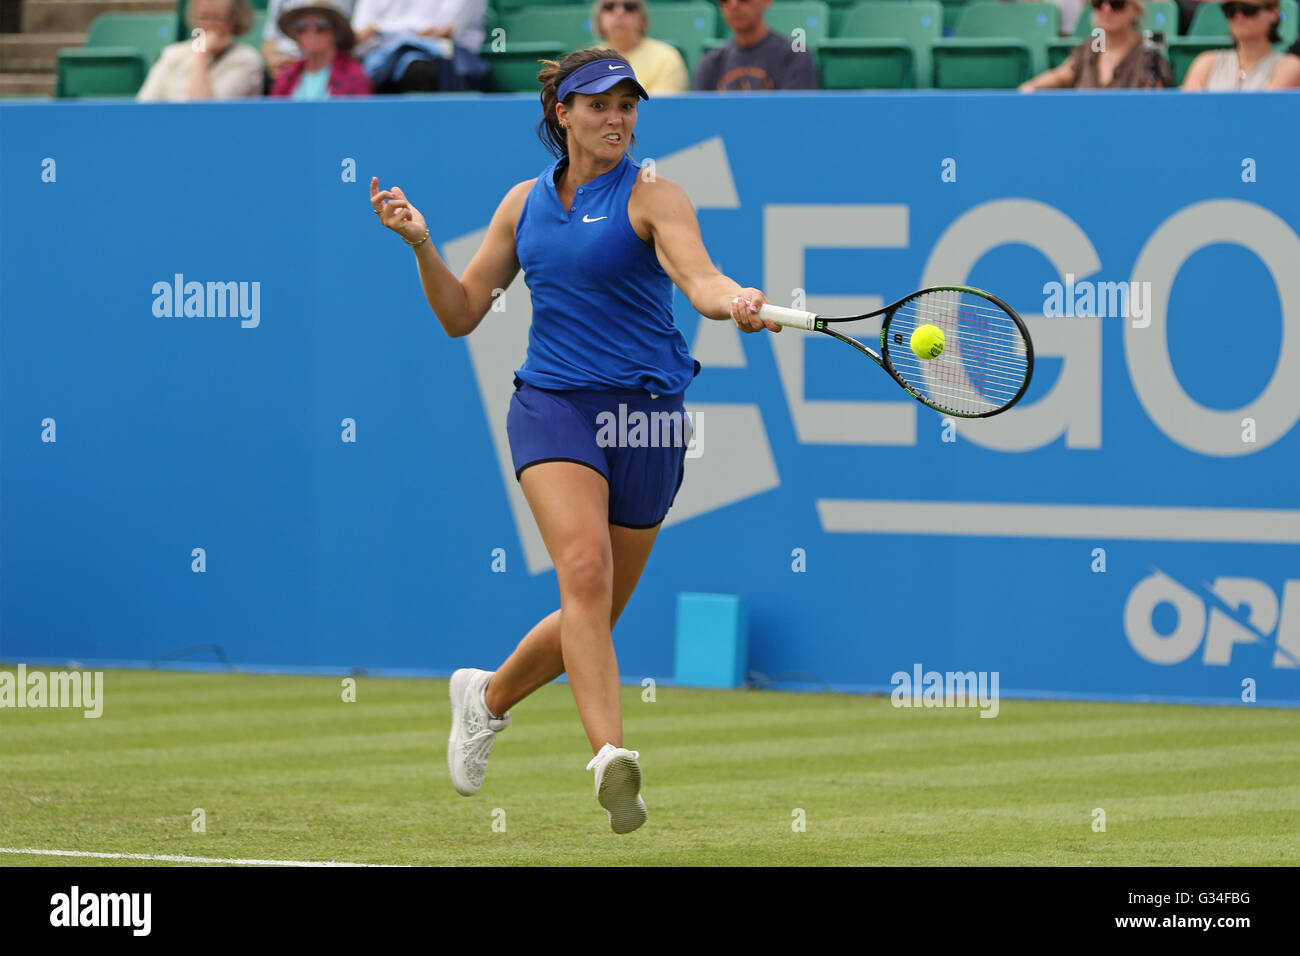 07.06.2016. Nottingham Tennis Centre, Nottingham, England. Aegon WTA Nottingham Open Day 4. Running forehand from Laura Robson of Great Britain Stock Photo